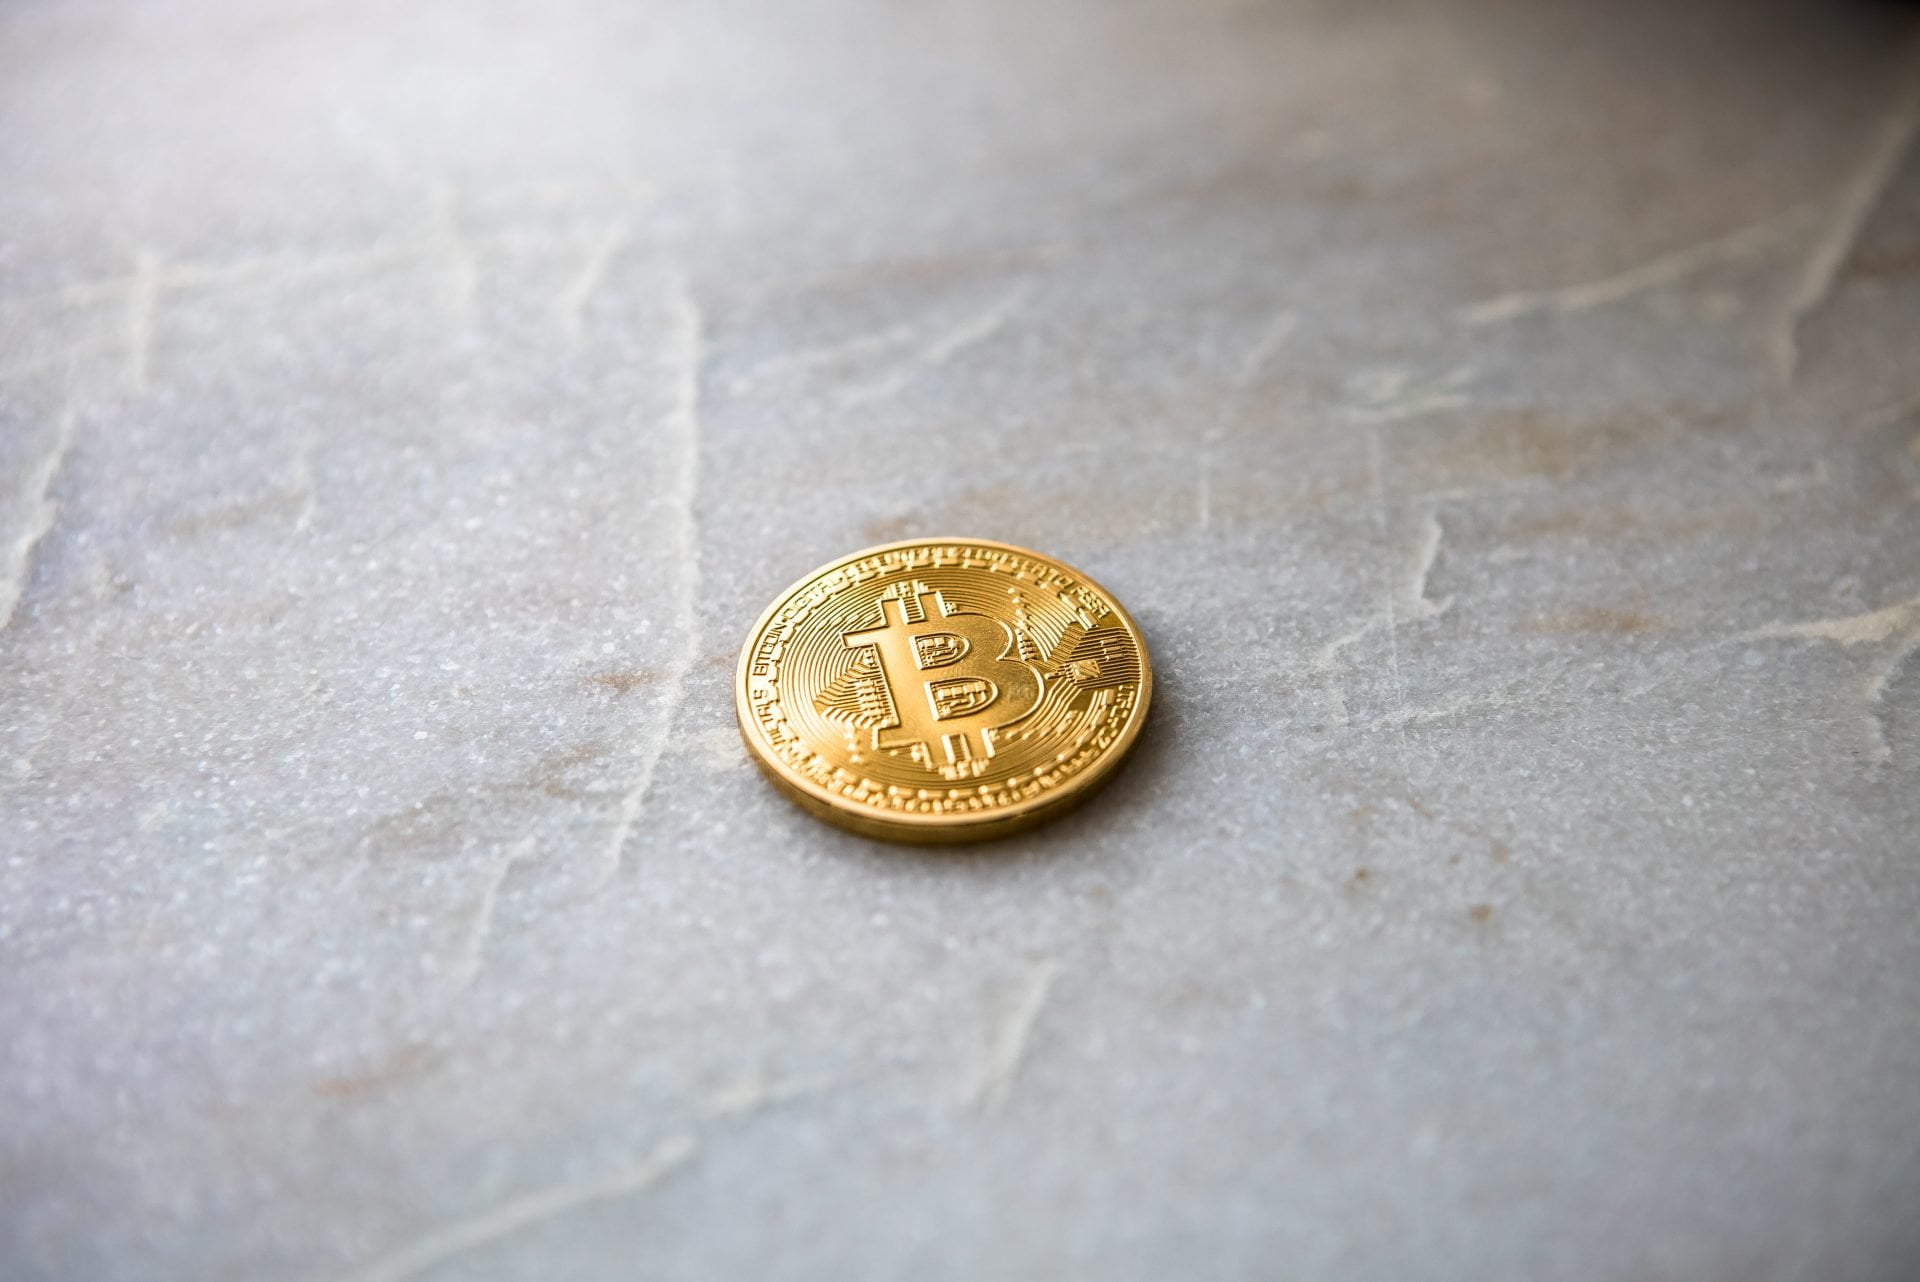 Institutional Bitcoin Interest Wanes as BTC Price Falls Under $10,000 25